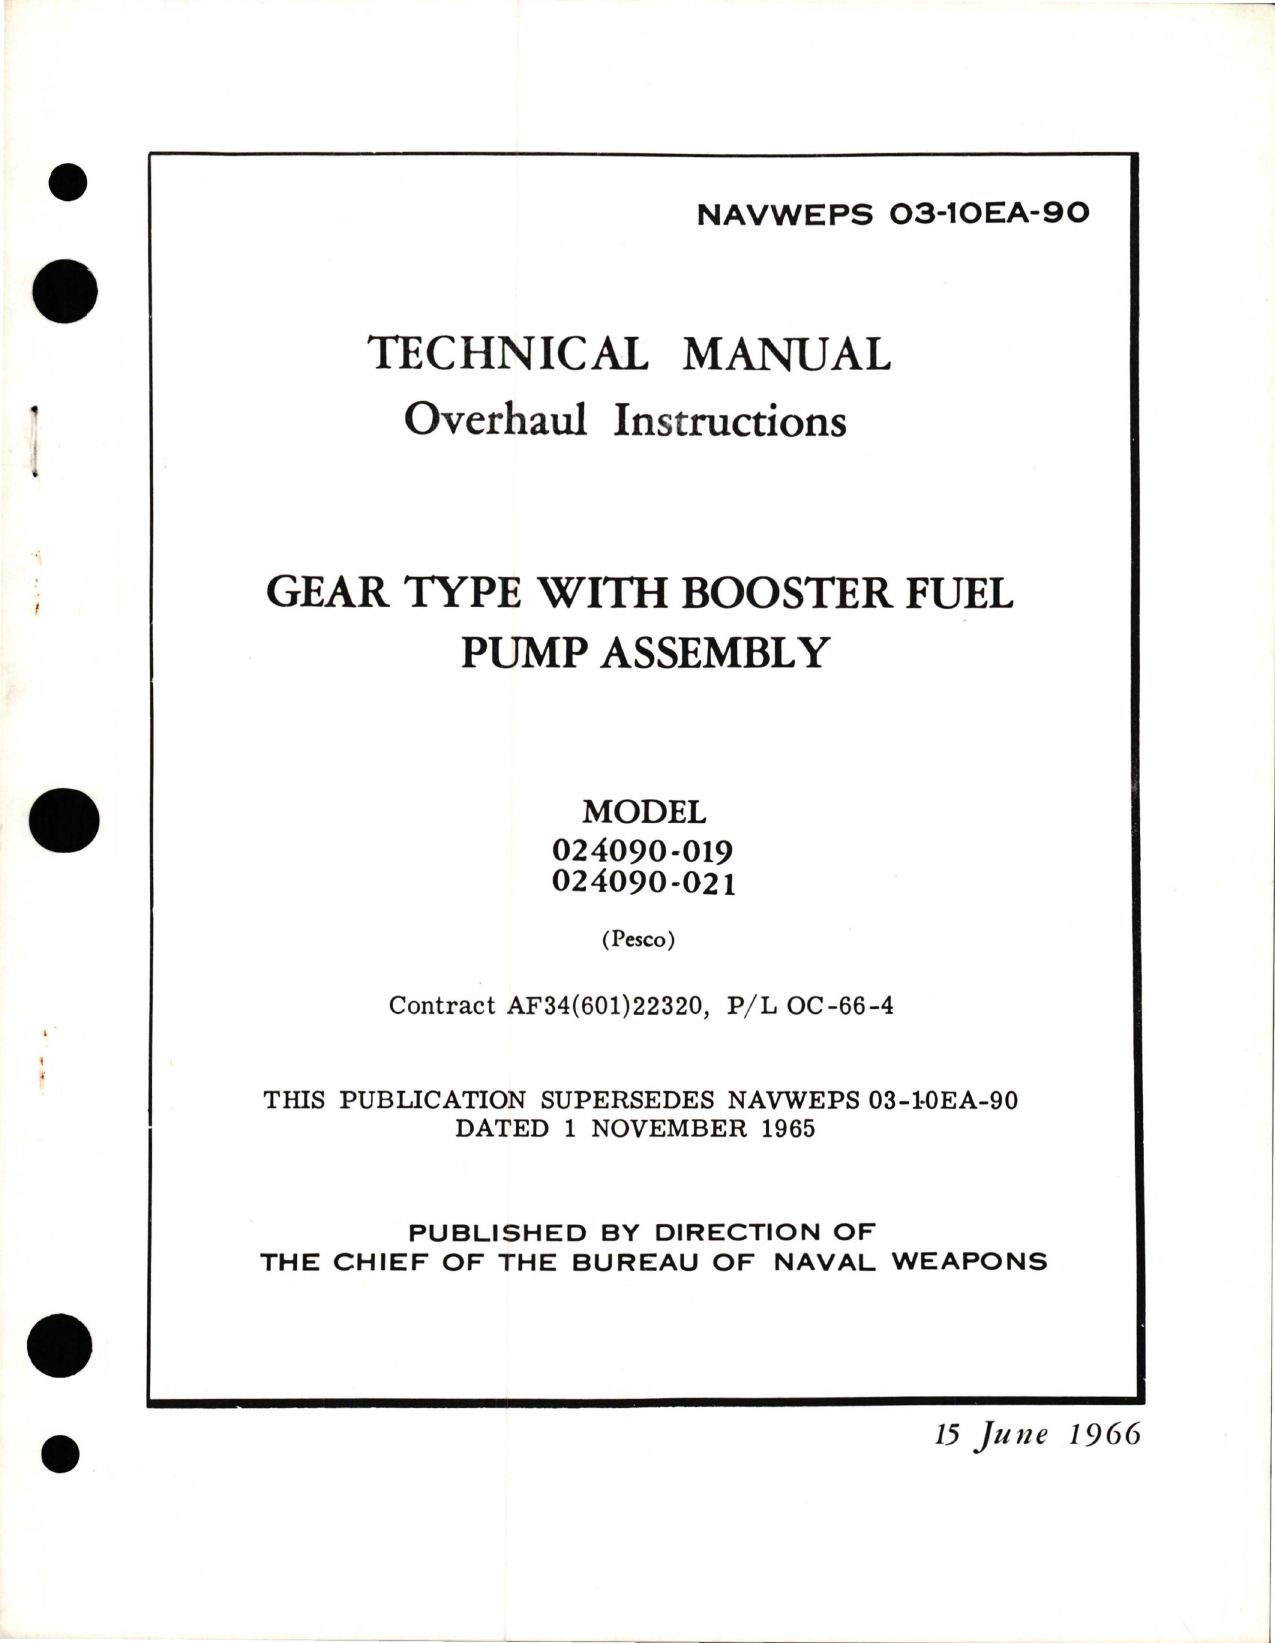 Sample page 1 from AirCorps Library document: Overhaul Instructions for Gear Type w Booster Fuel Pump Assembly - Models 024090-019 and 024090-021